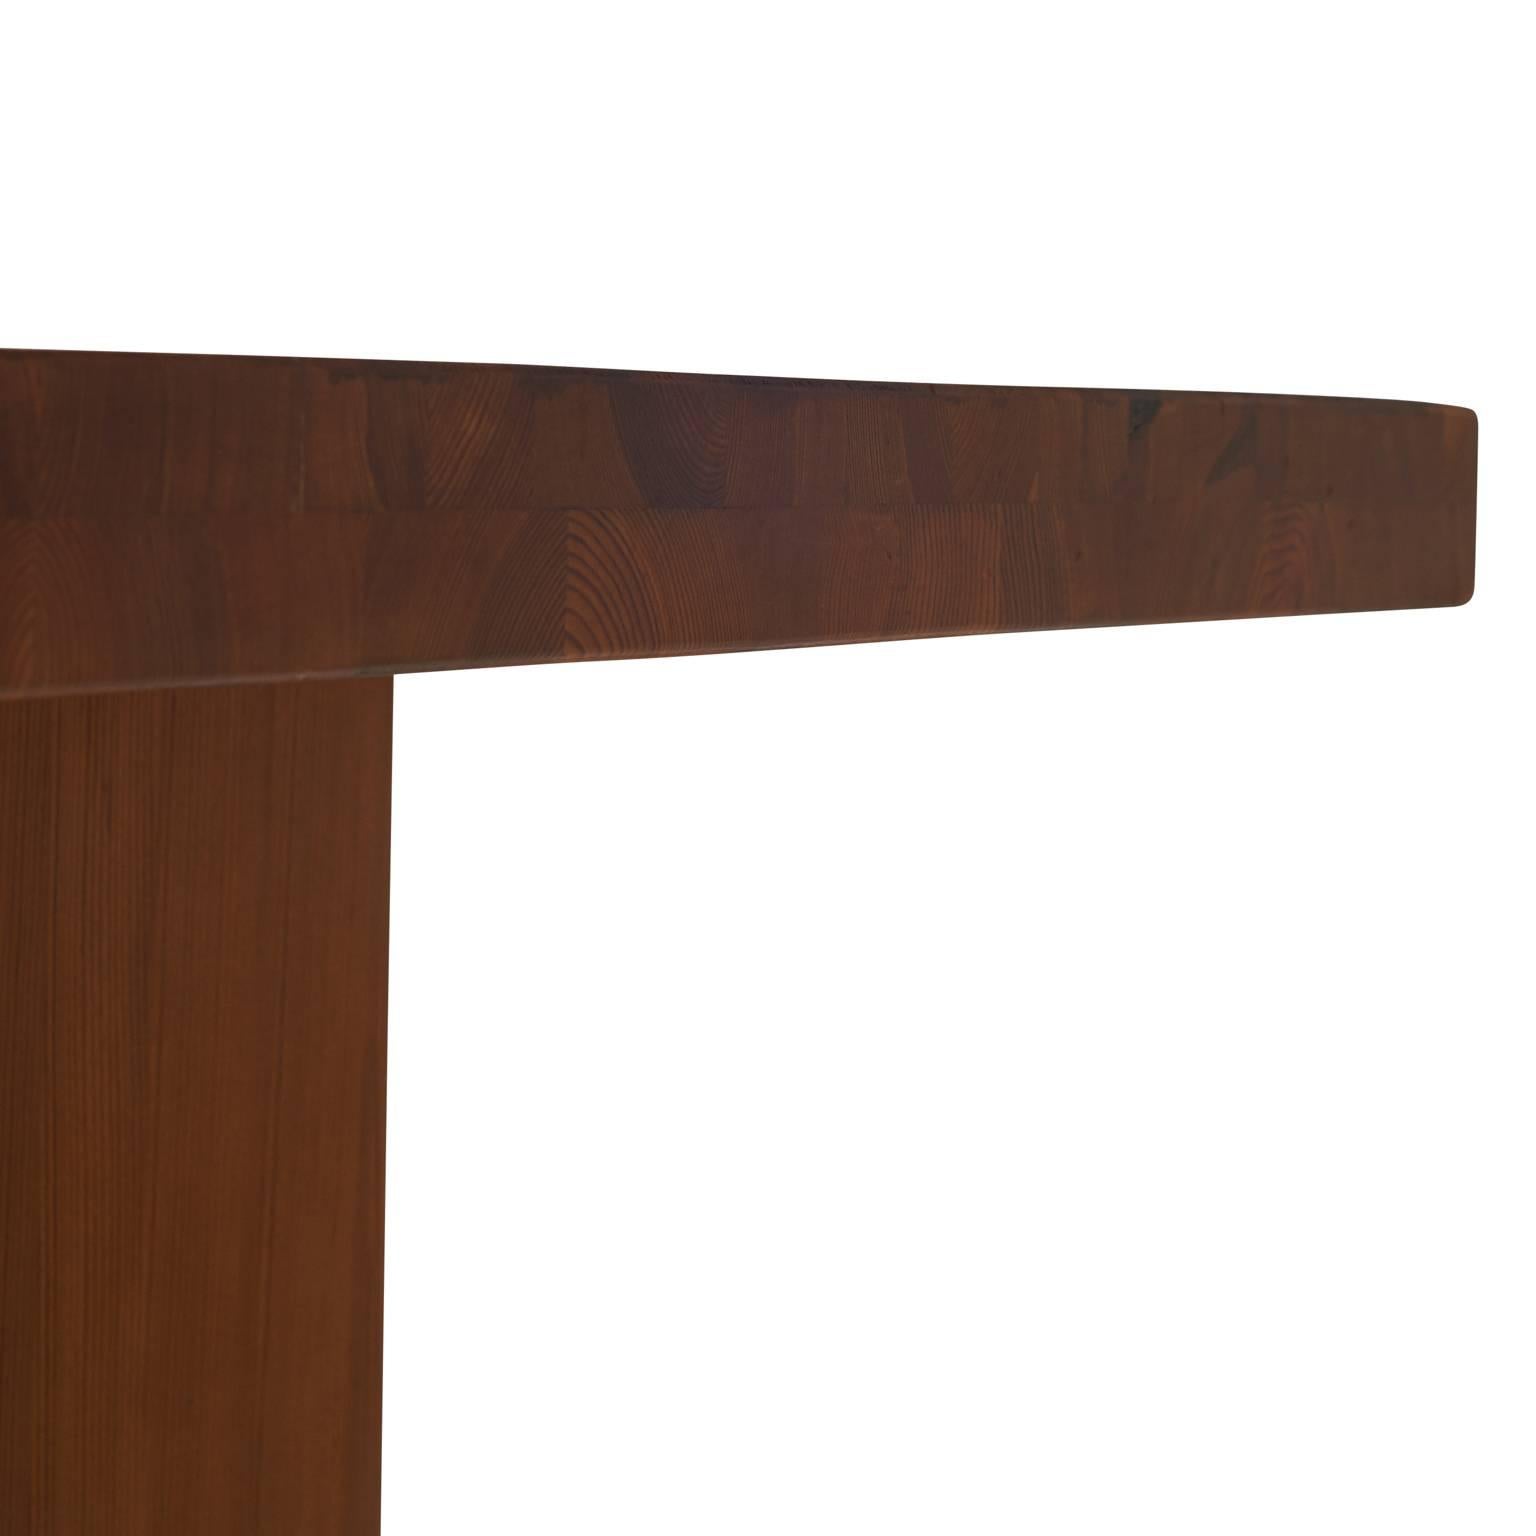 A dining table by Axel Einar Hjorth. Beautifully grained Oregon pine with a matte finish.